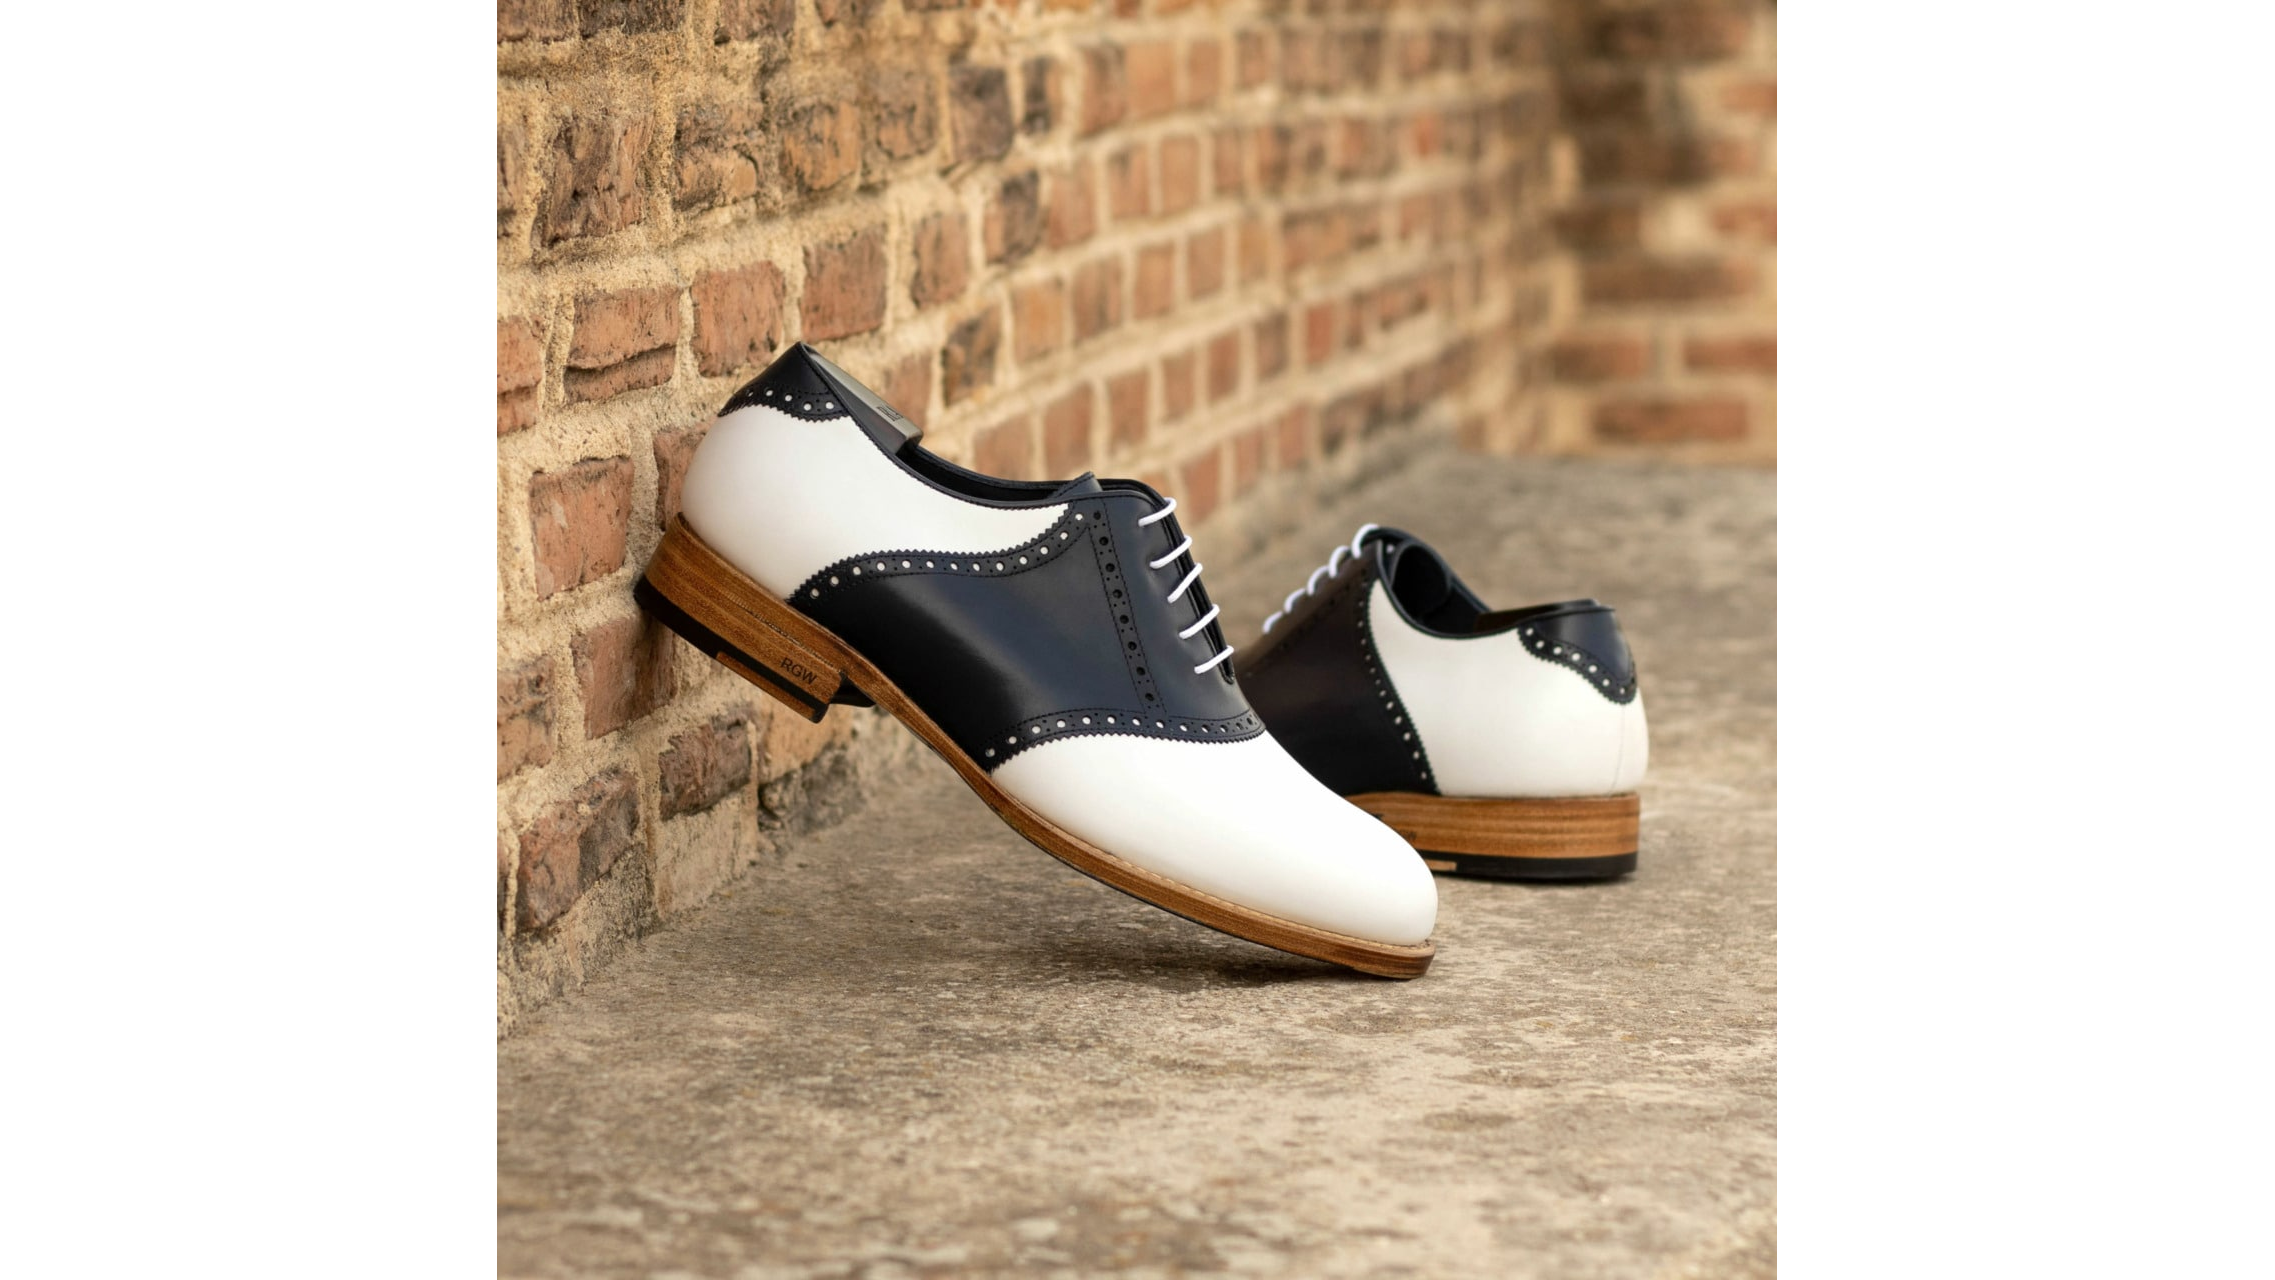 Buy Two-Tone Leather Men’s Saddle Shoes For Retro Look & Ultimate Comfort